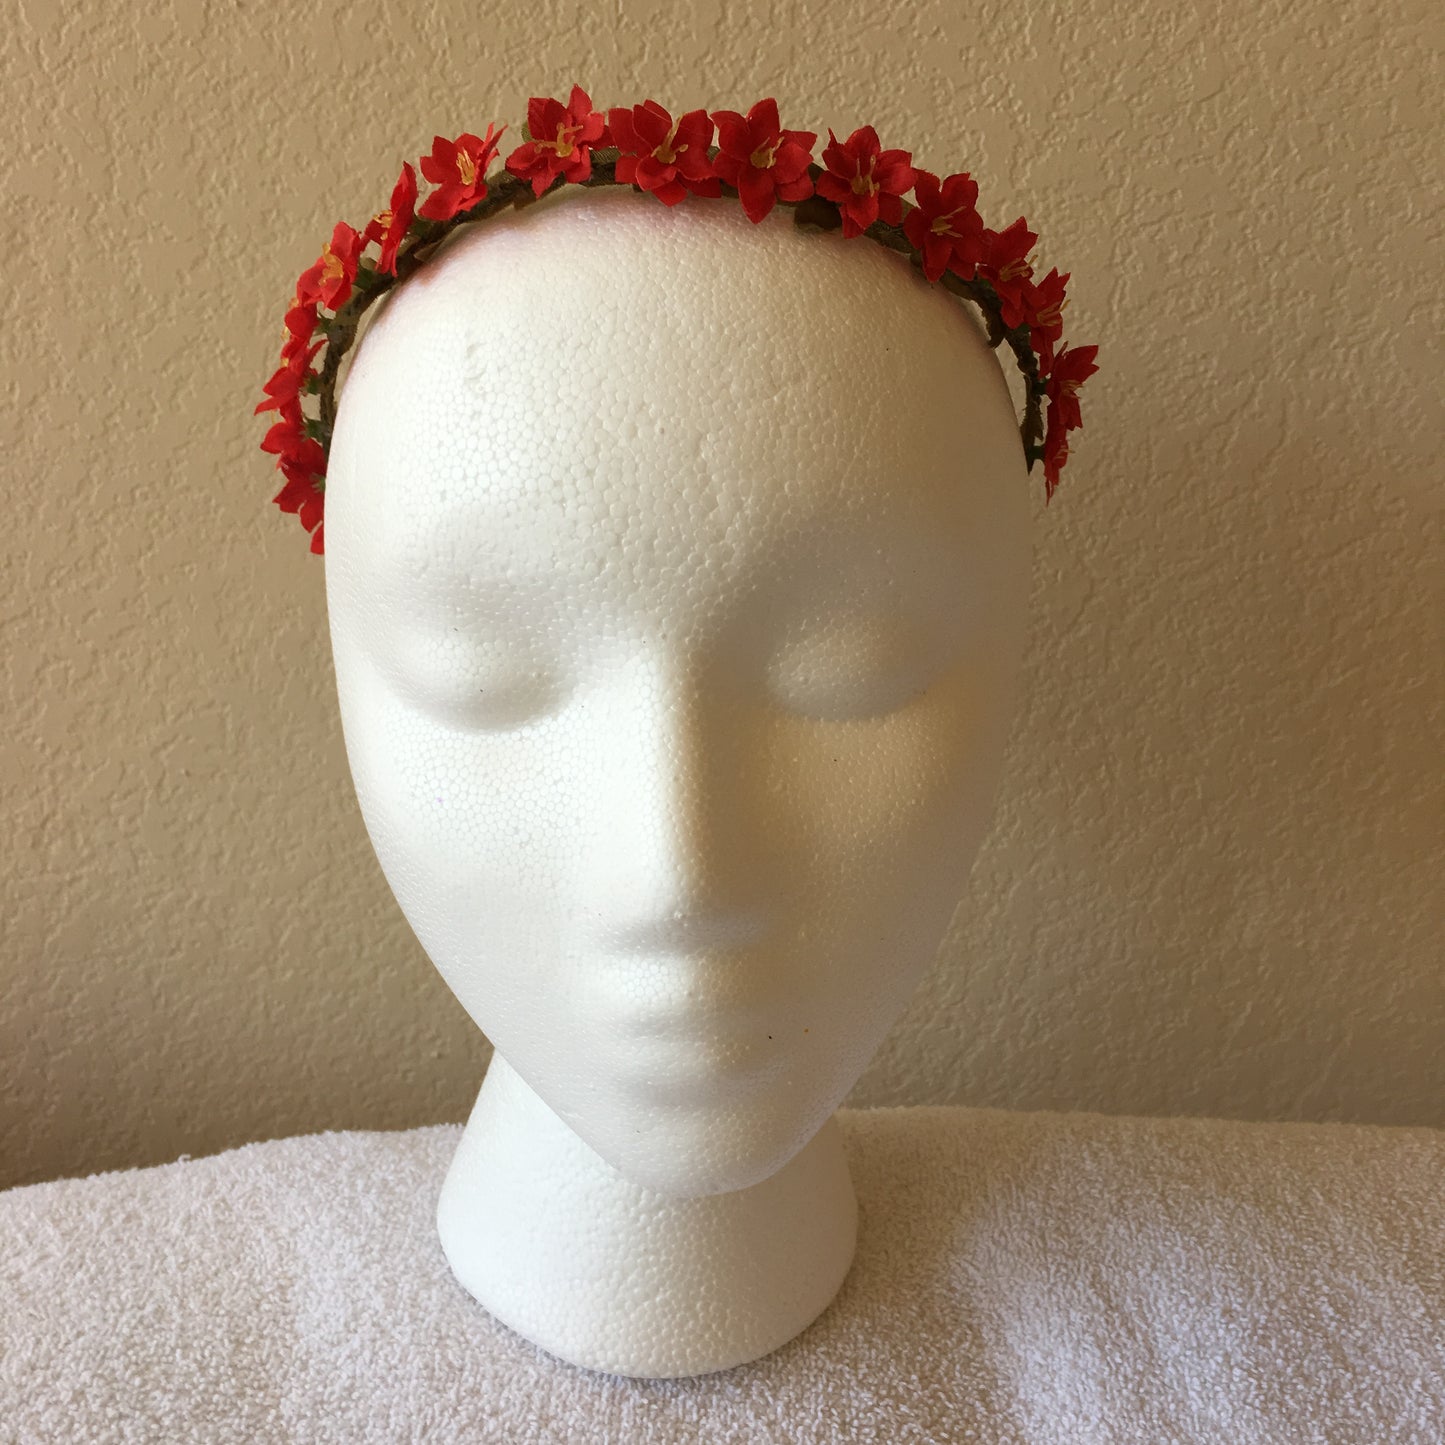 Extra Small Wreath - Red mini flowers